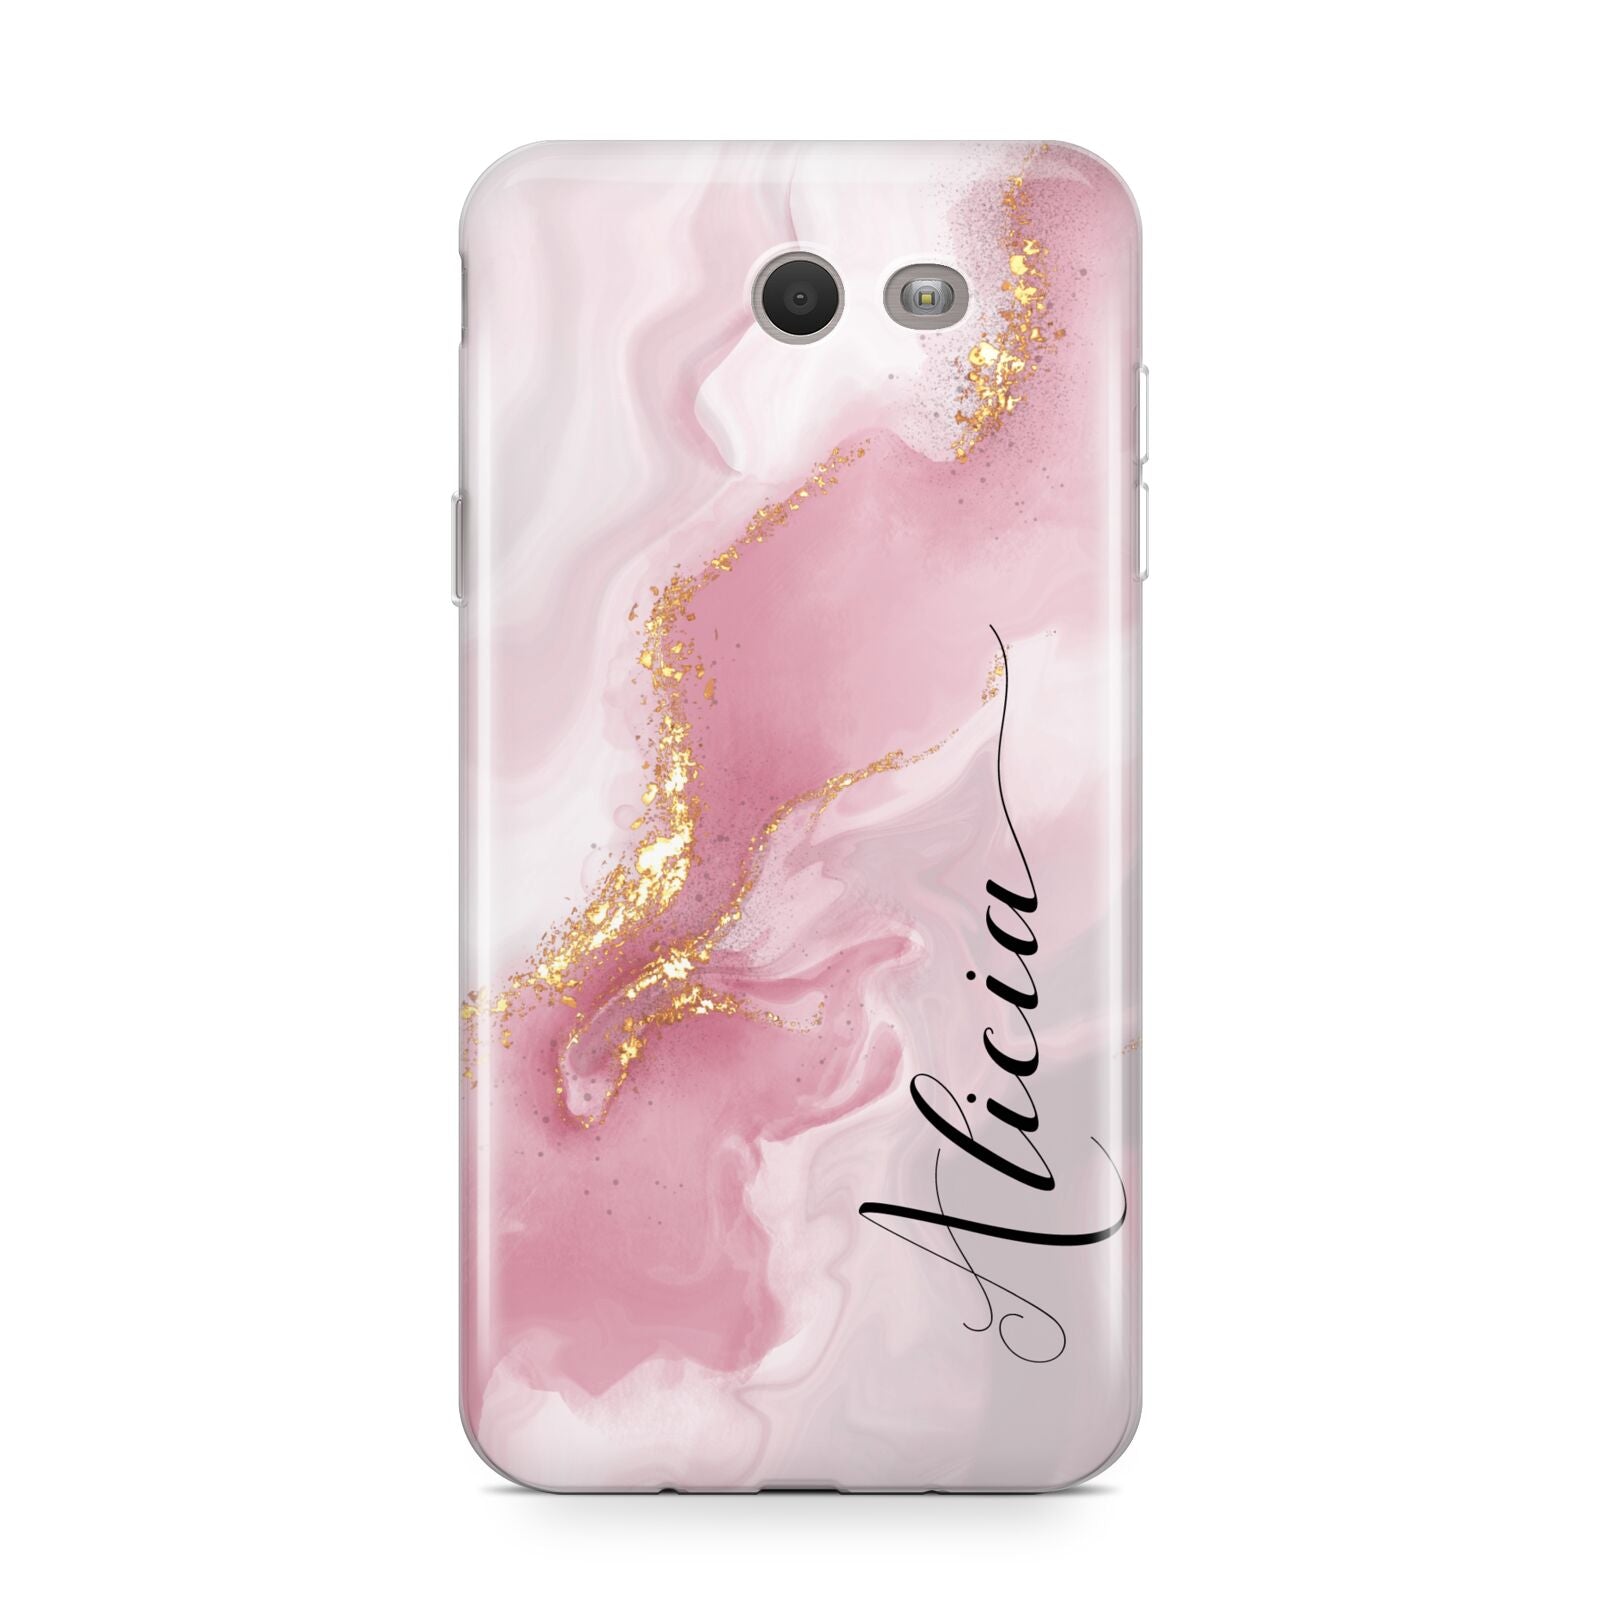 Personalised Pink Marble Samsung Galaxy J7 2017 Case